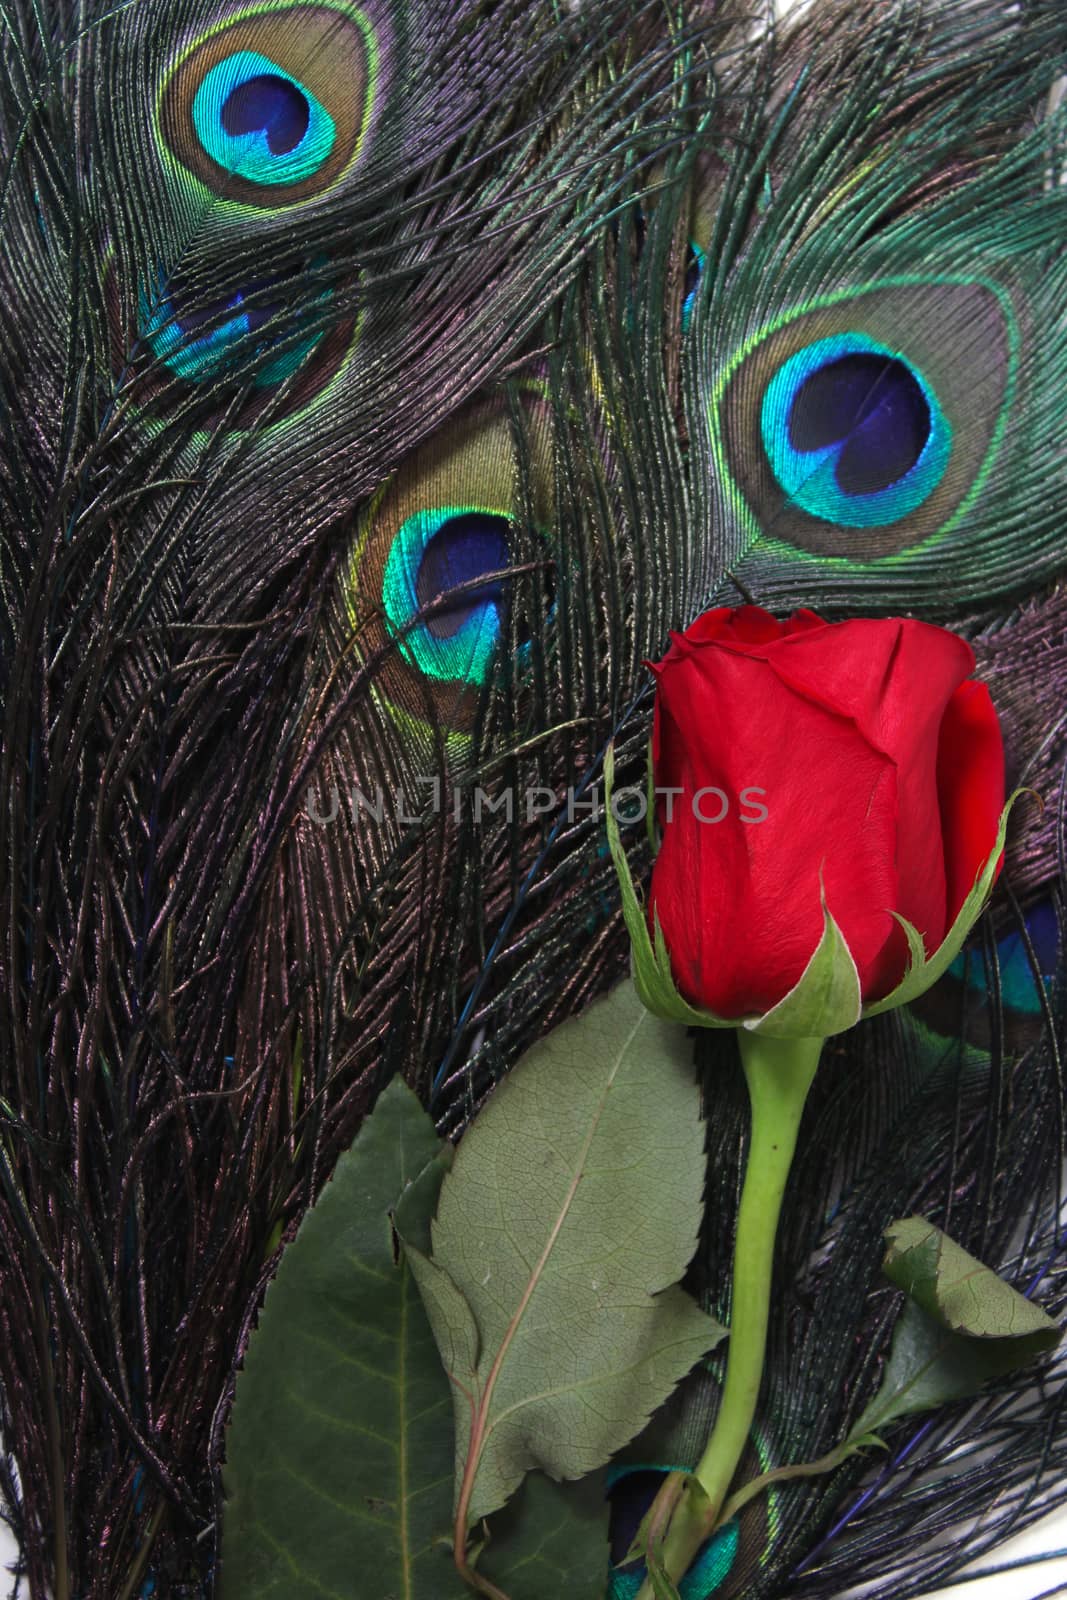 Red Rose With Peacock Feathers close up